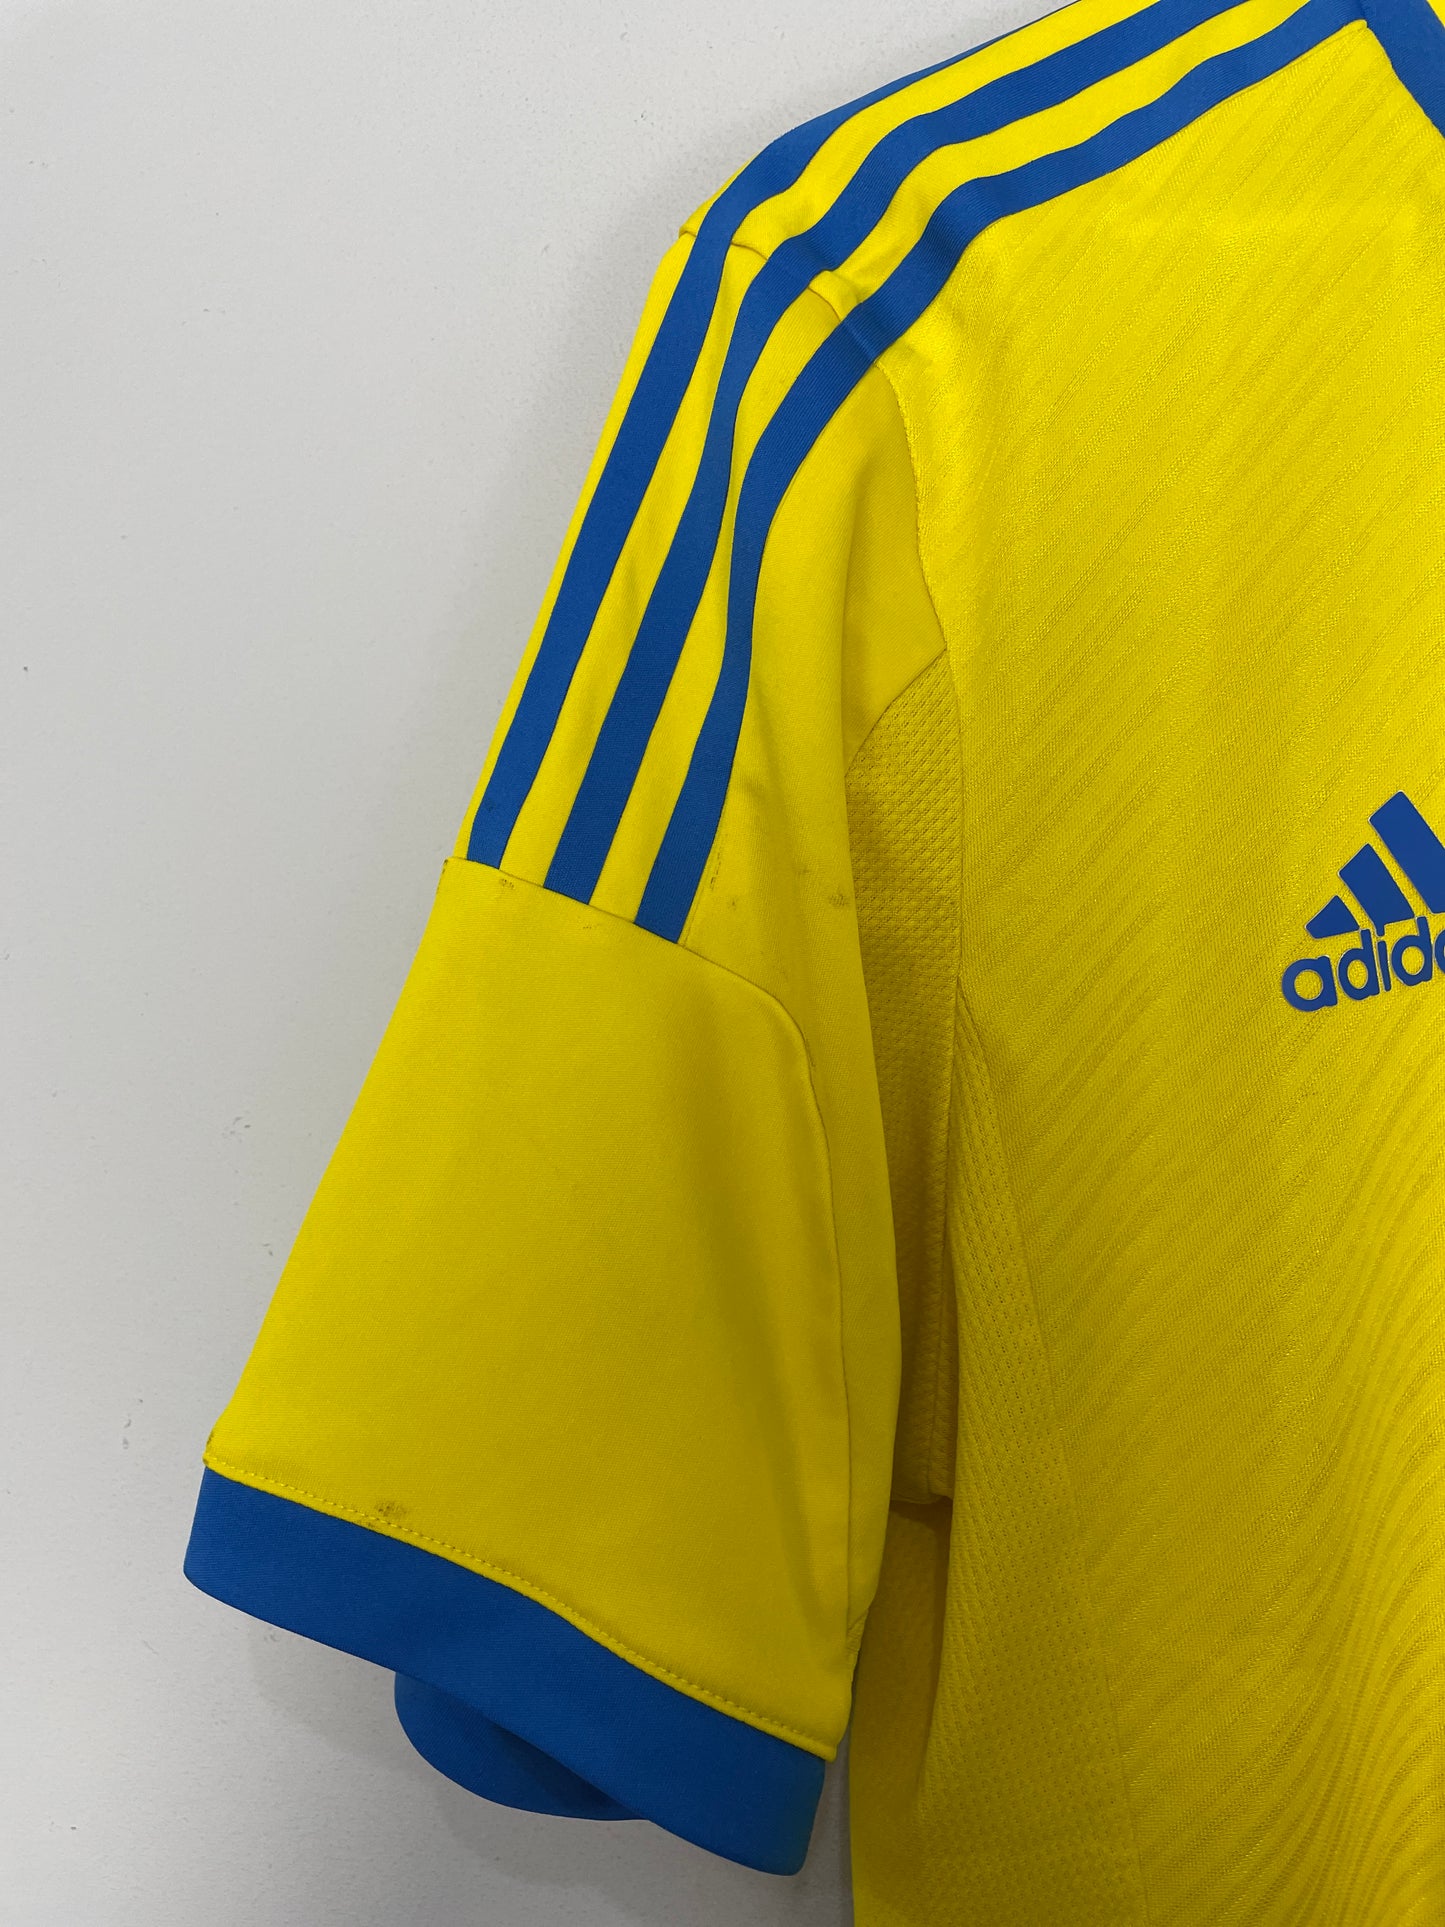 2016/17 SWEDEN #10 *PLAYER ISSUE* HOME SHIRT (M) ADIDAS